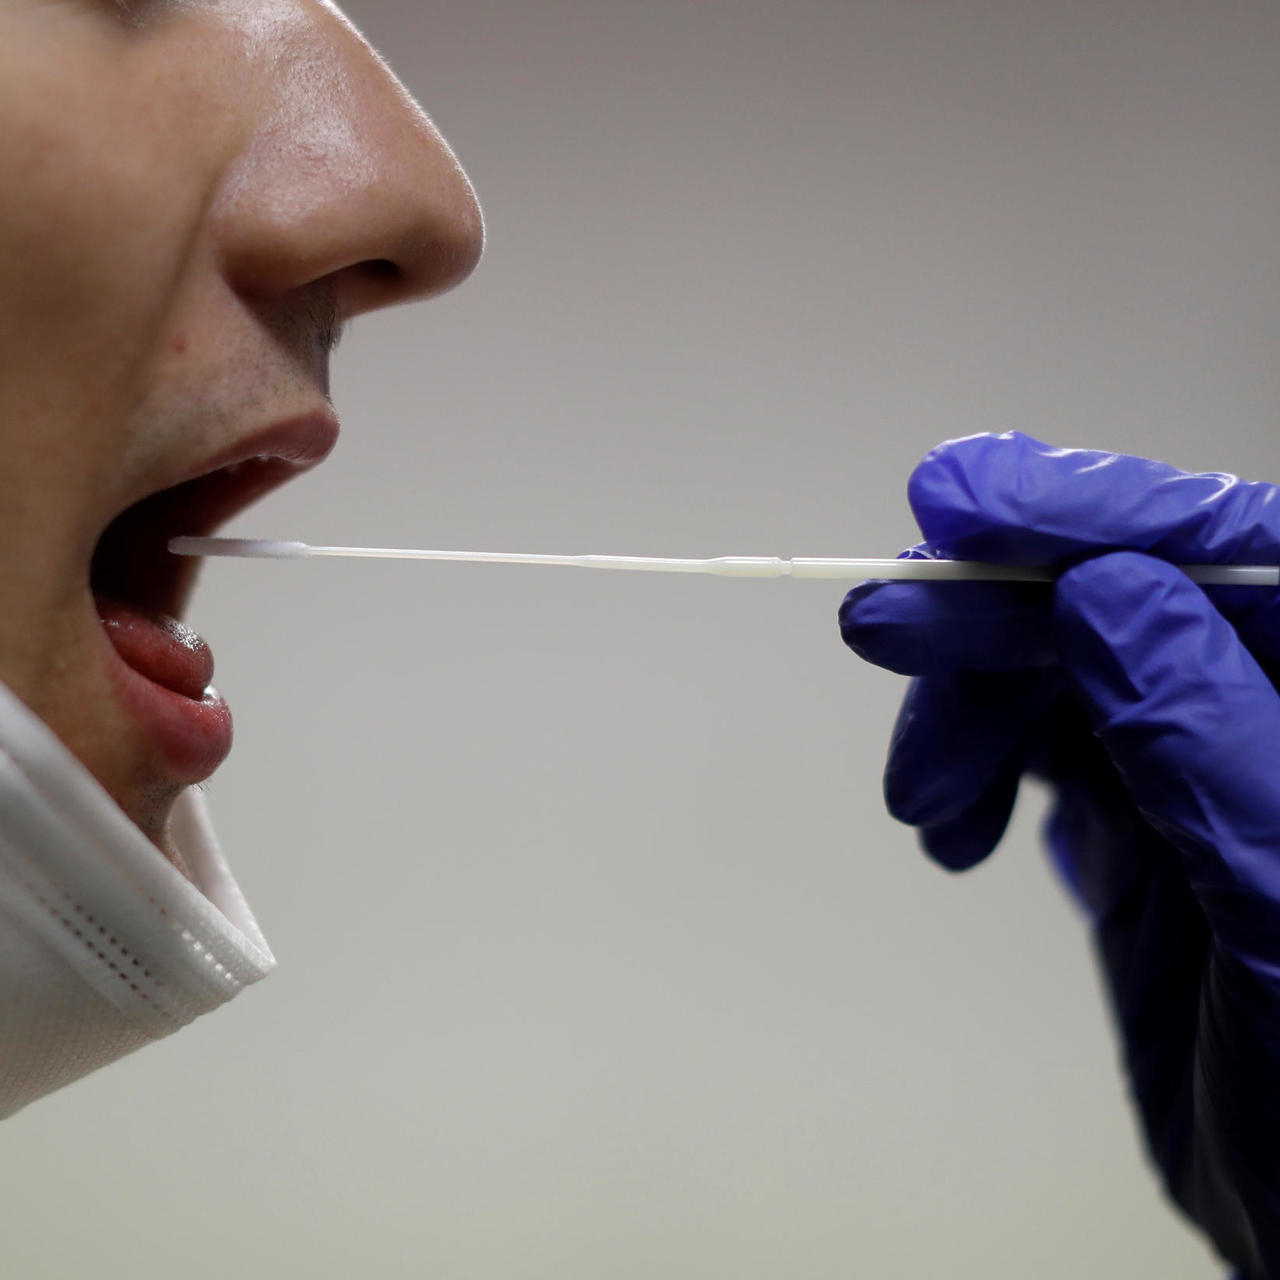 Abu Dhabi Rolls Out COVID-19 Saliva Test In More Schools Across Emirate